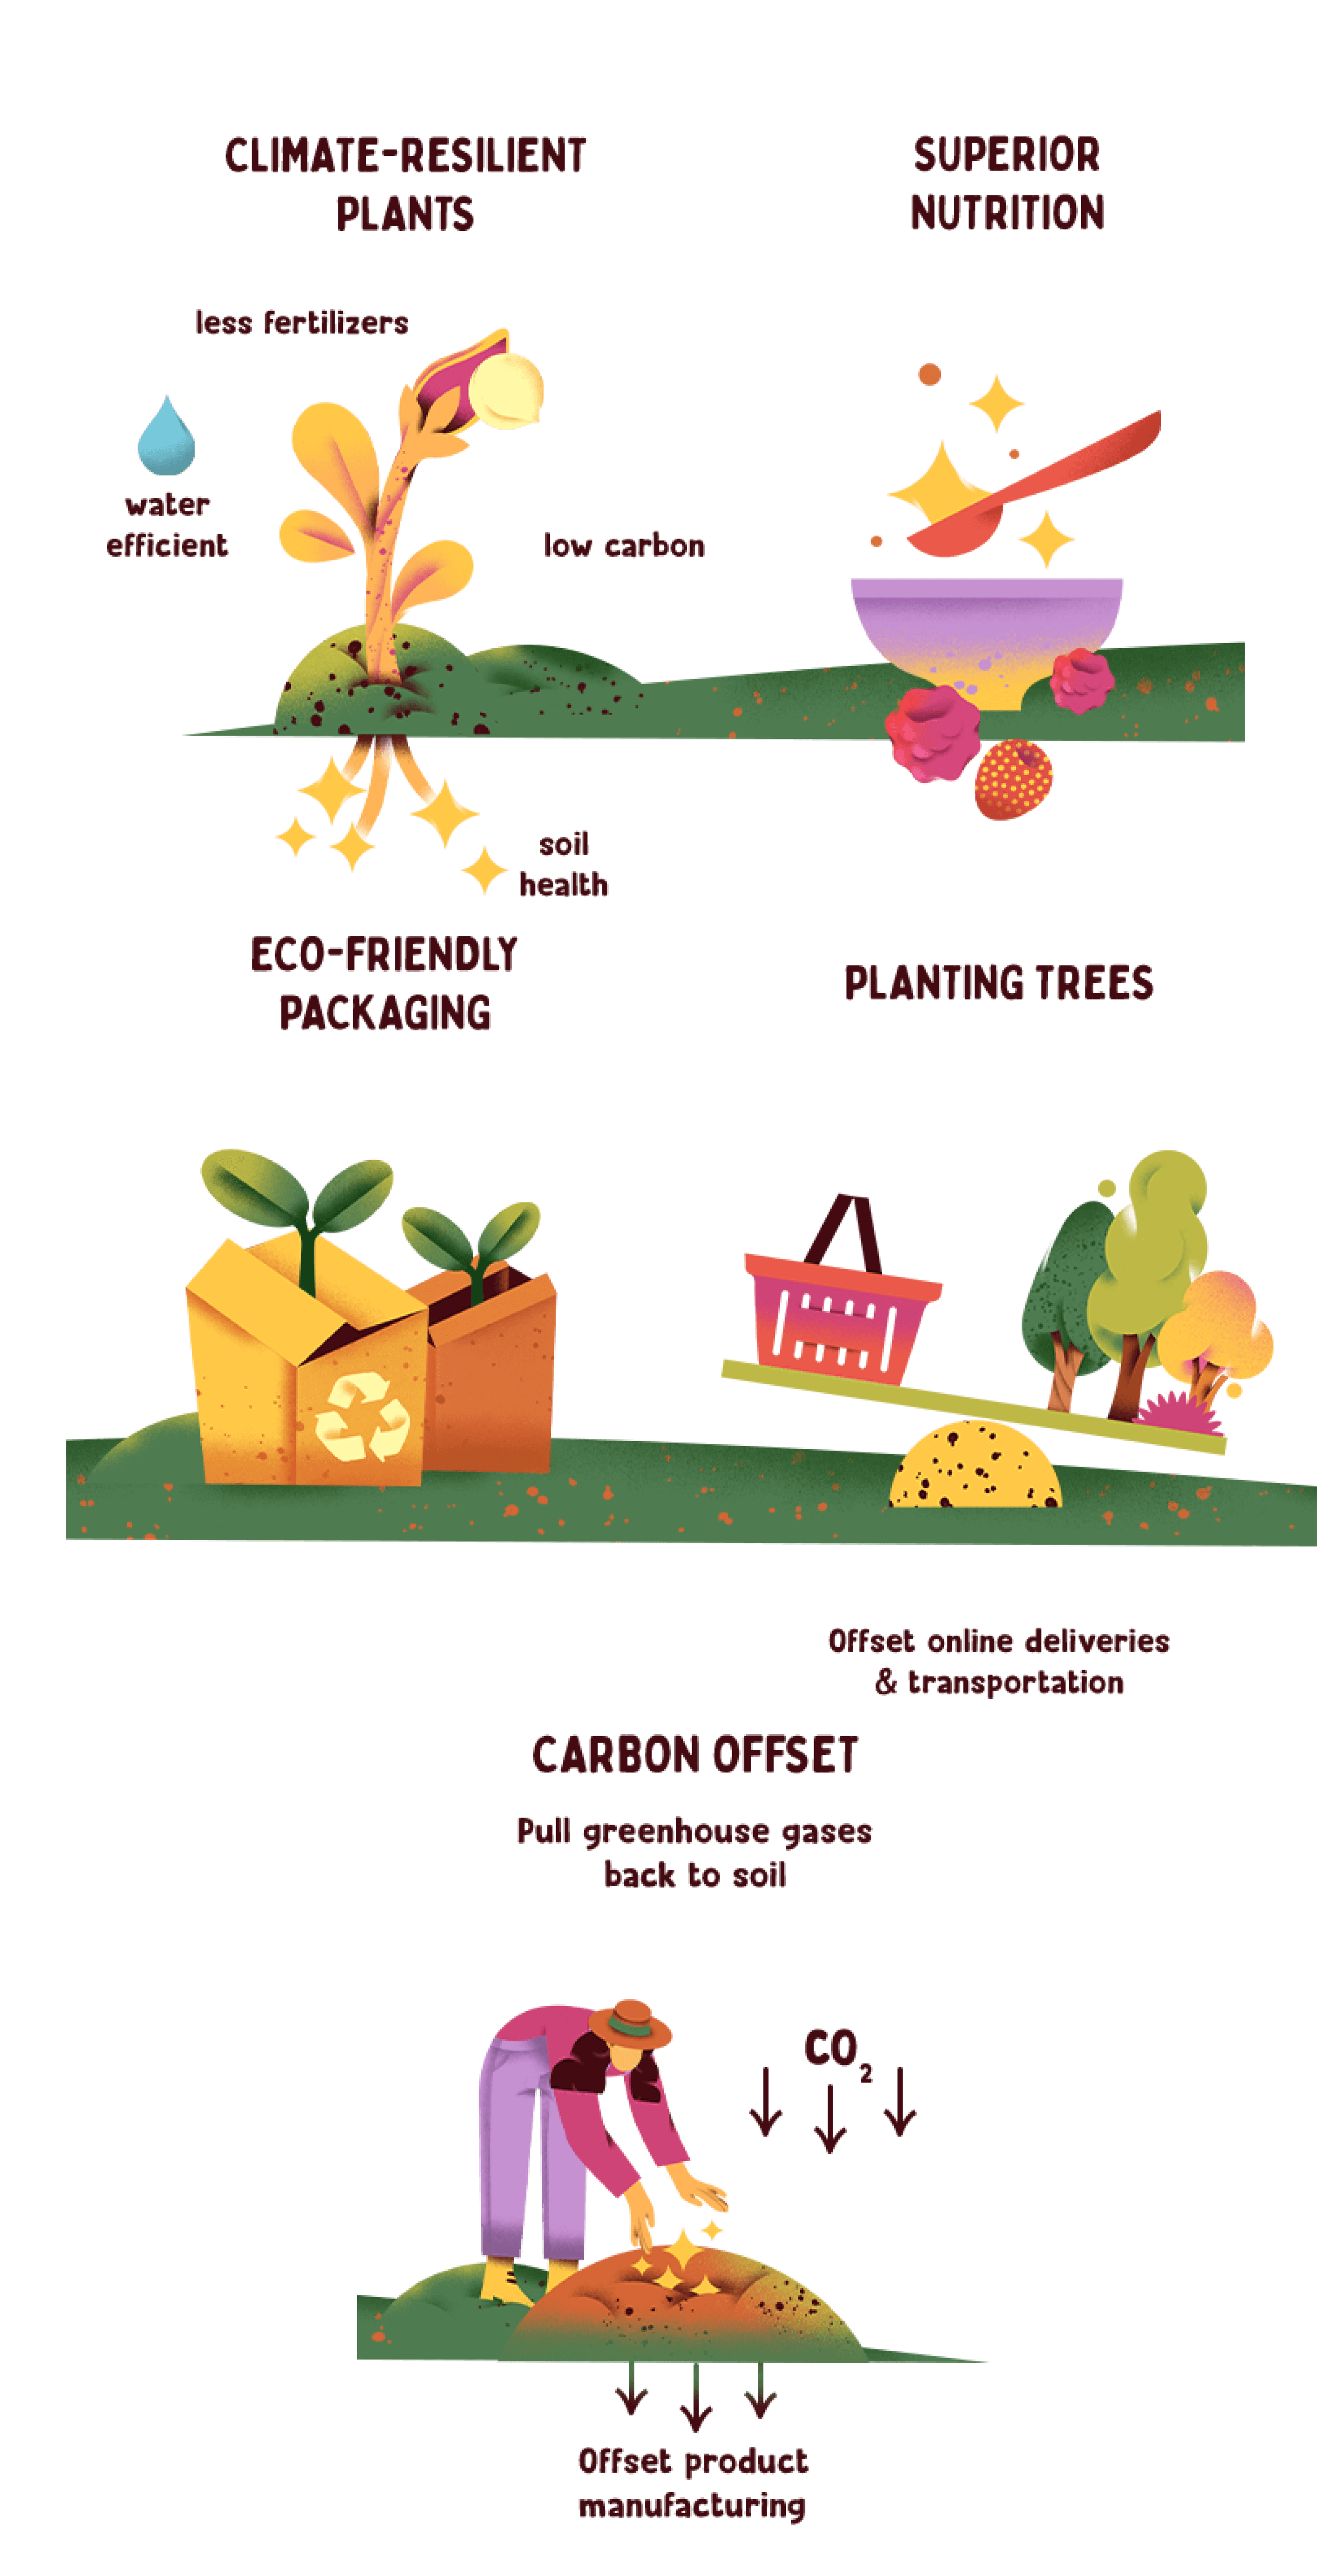 How To Make Plant In Little Alchemy 2 [SOLVED] 